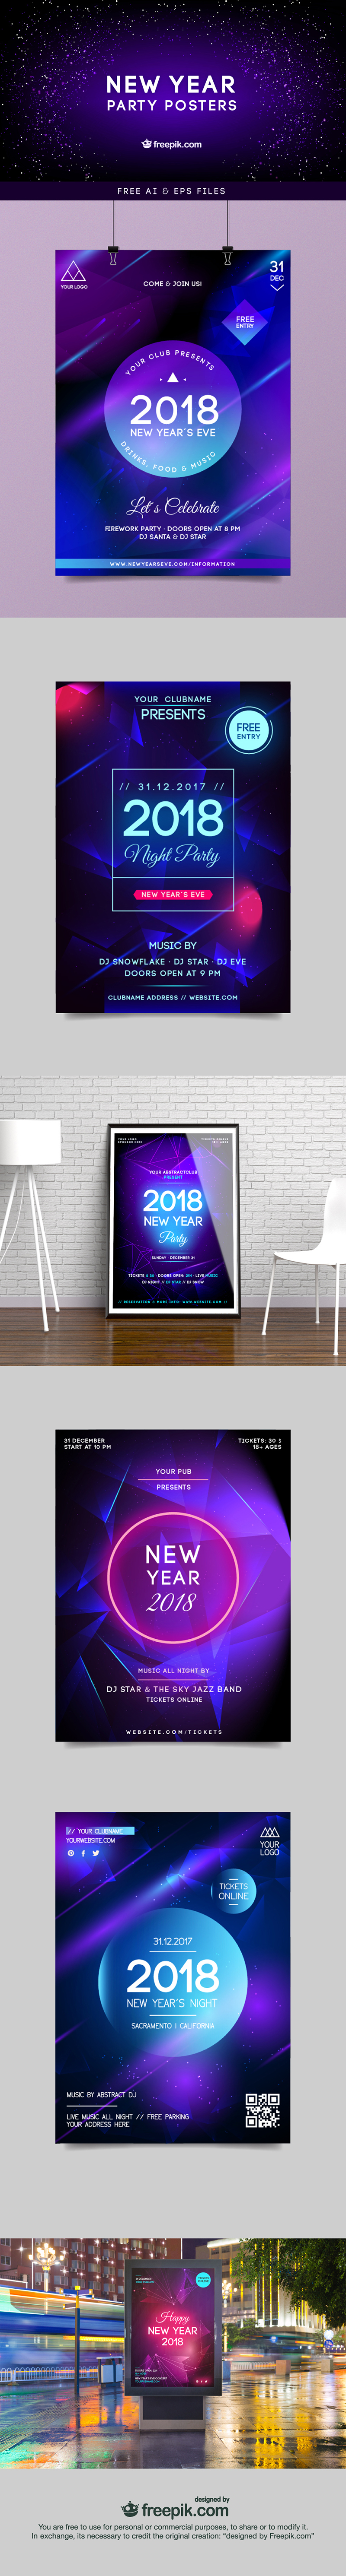 New Year Party Posters